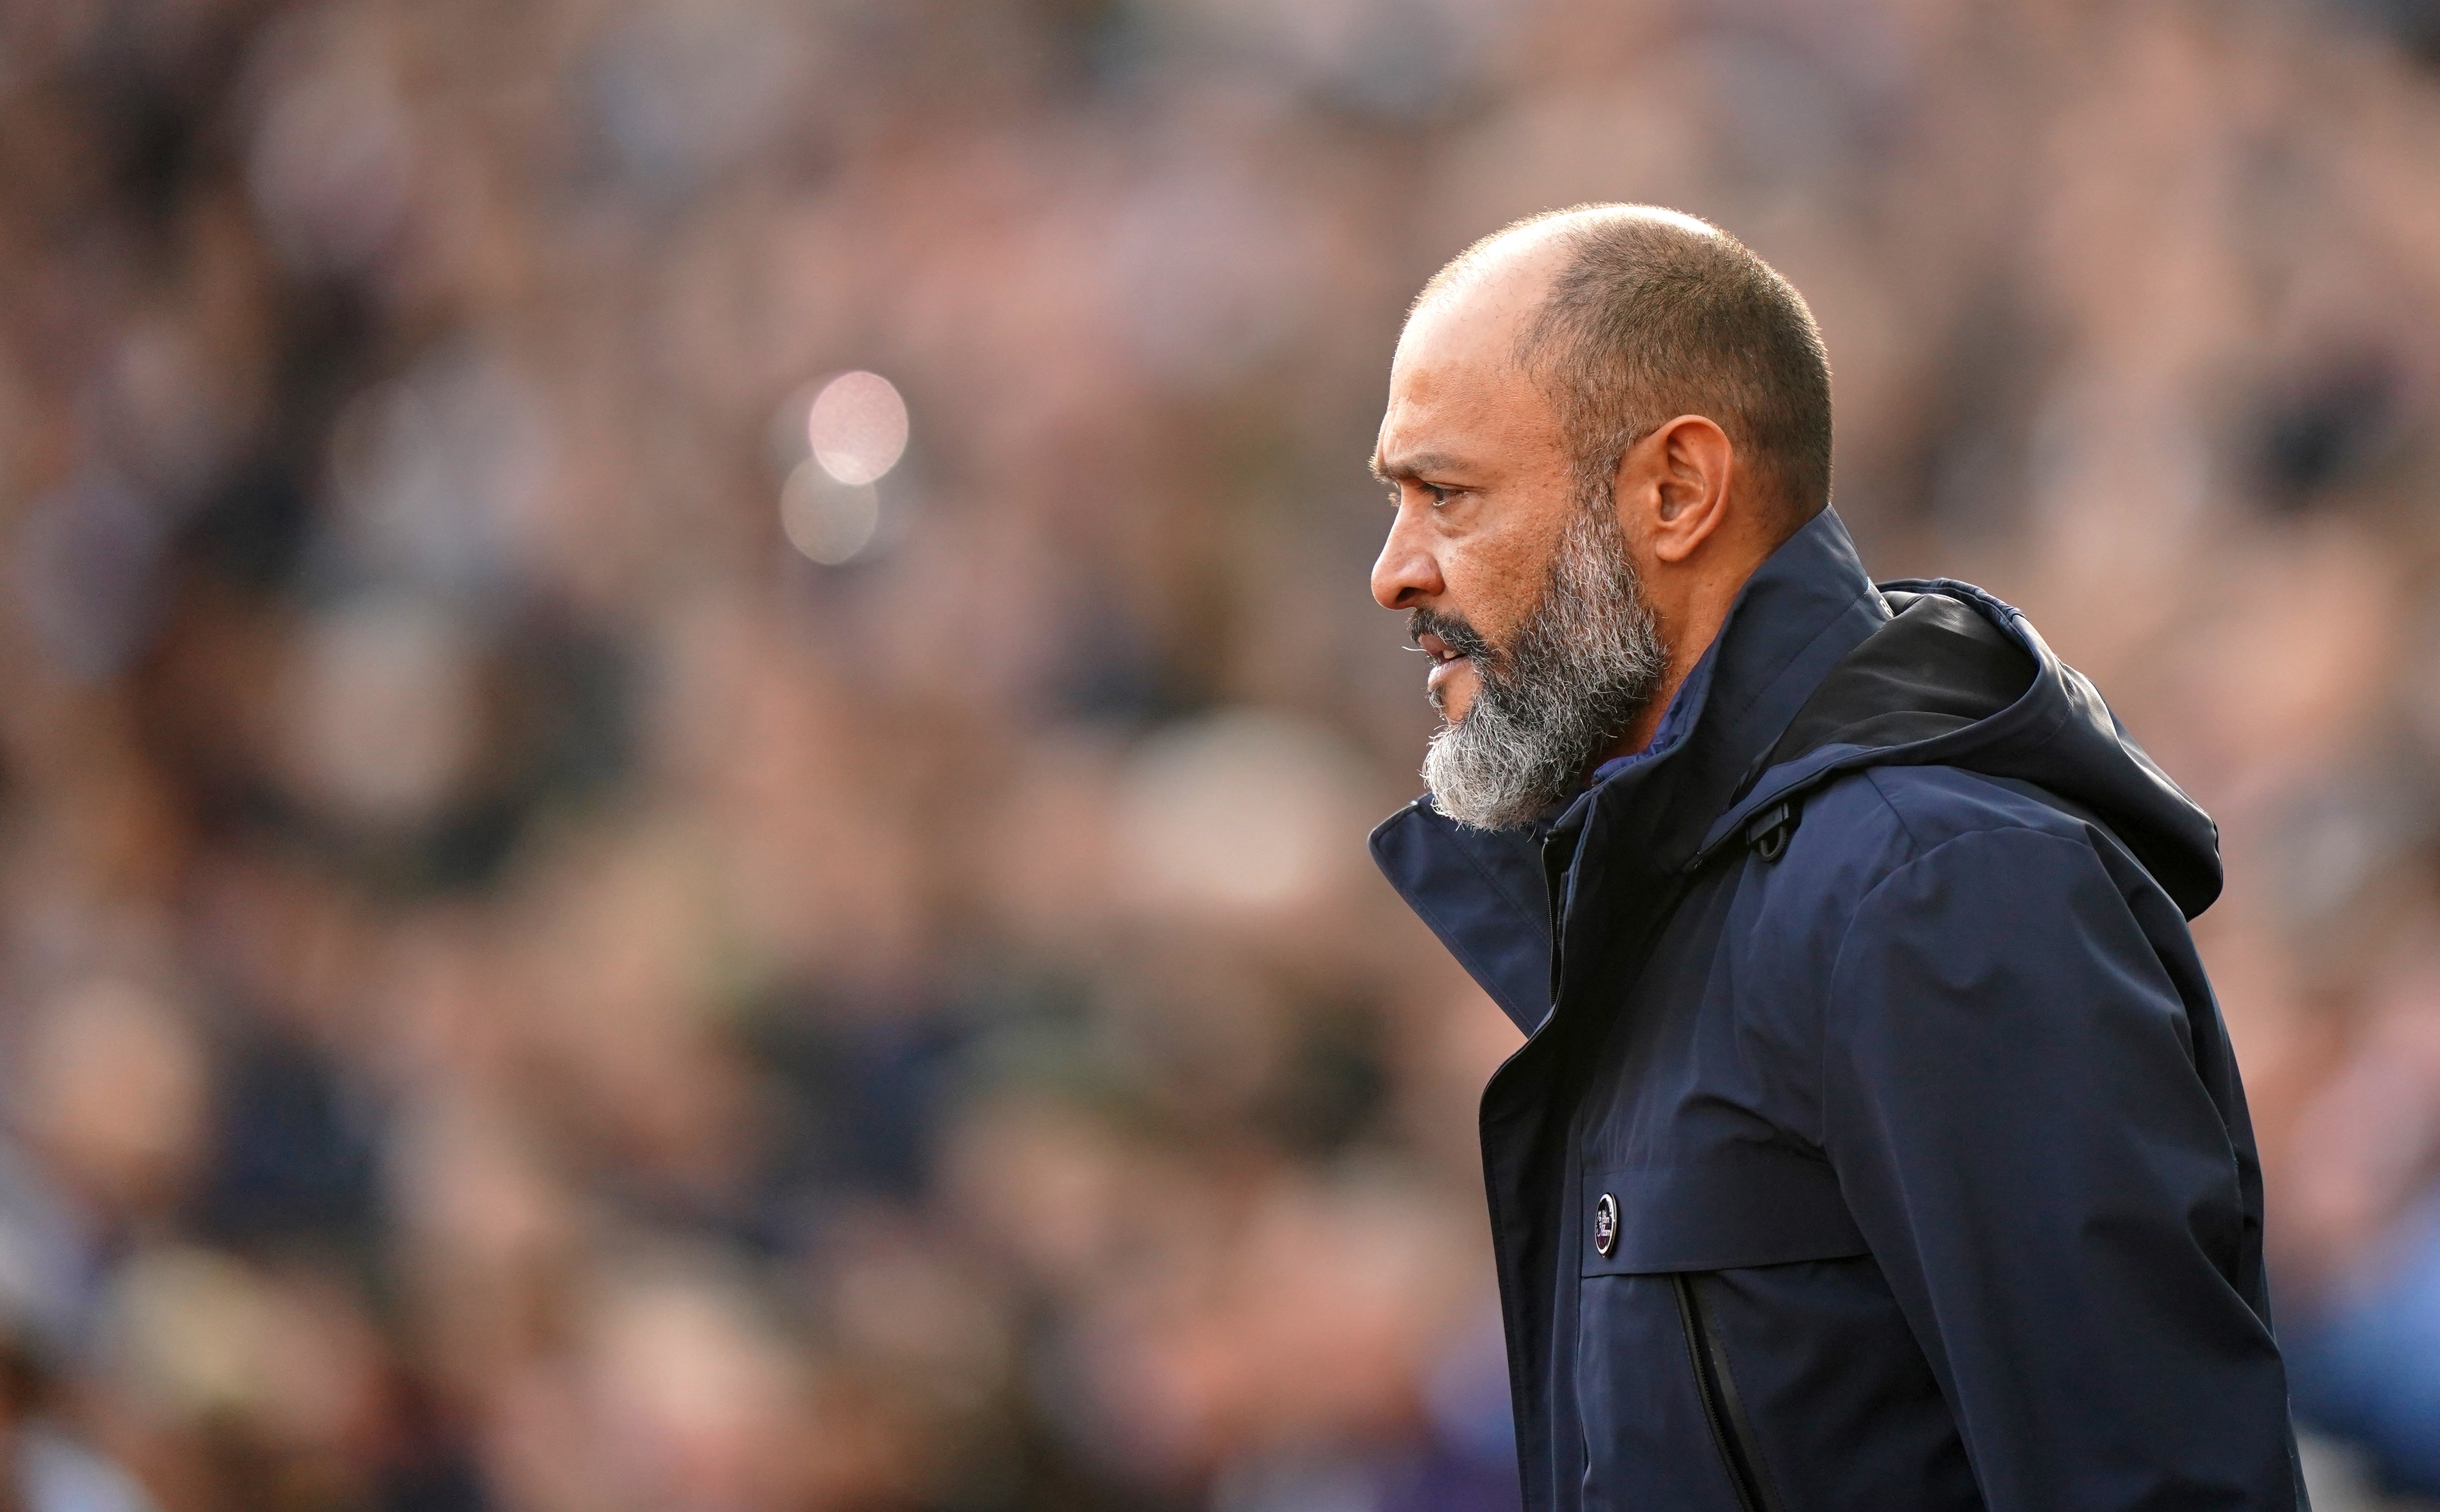 Tottenham fans have turned on Nuno Espirito Santo after the defeat (Tim Goode/PA)